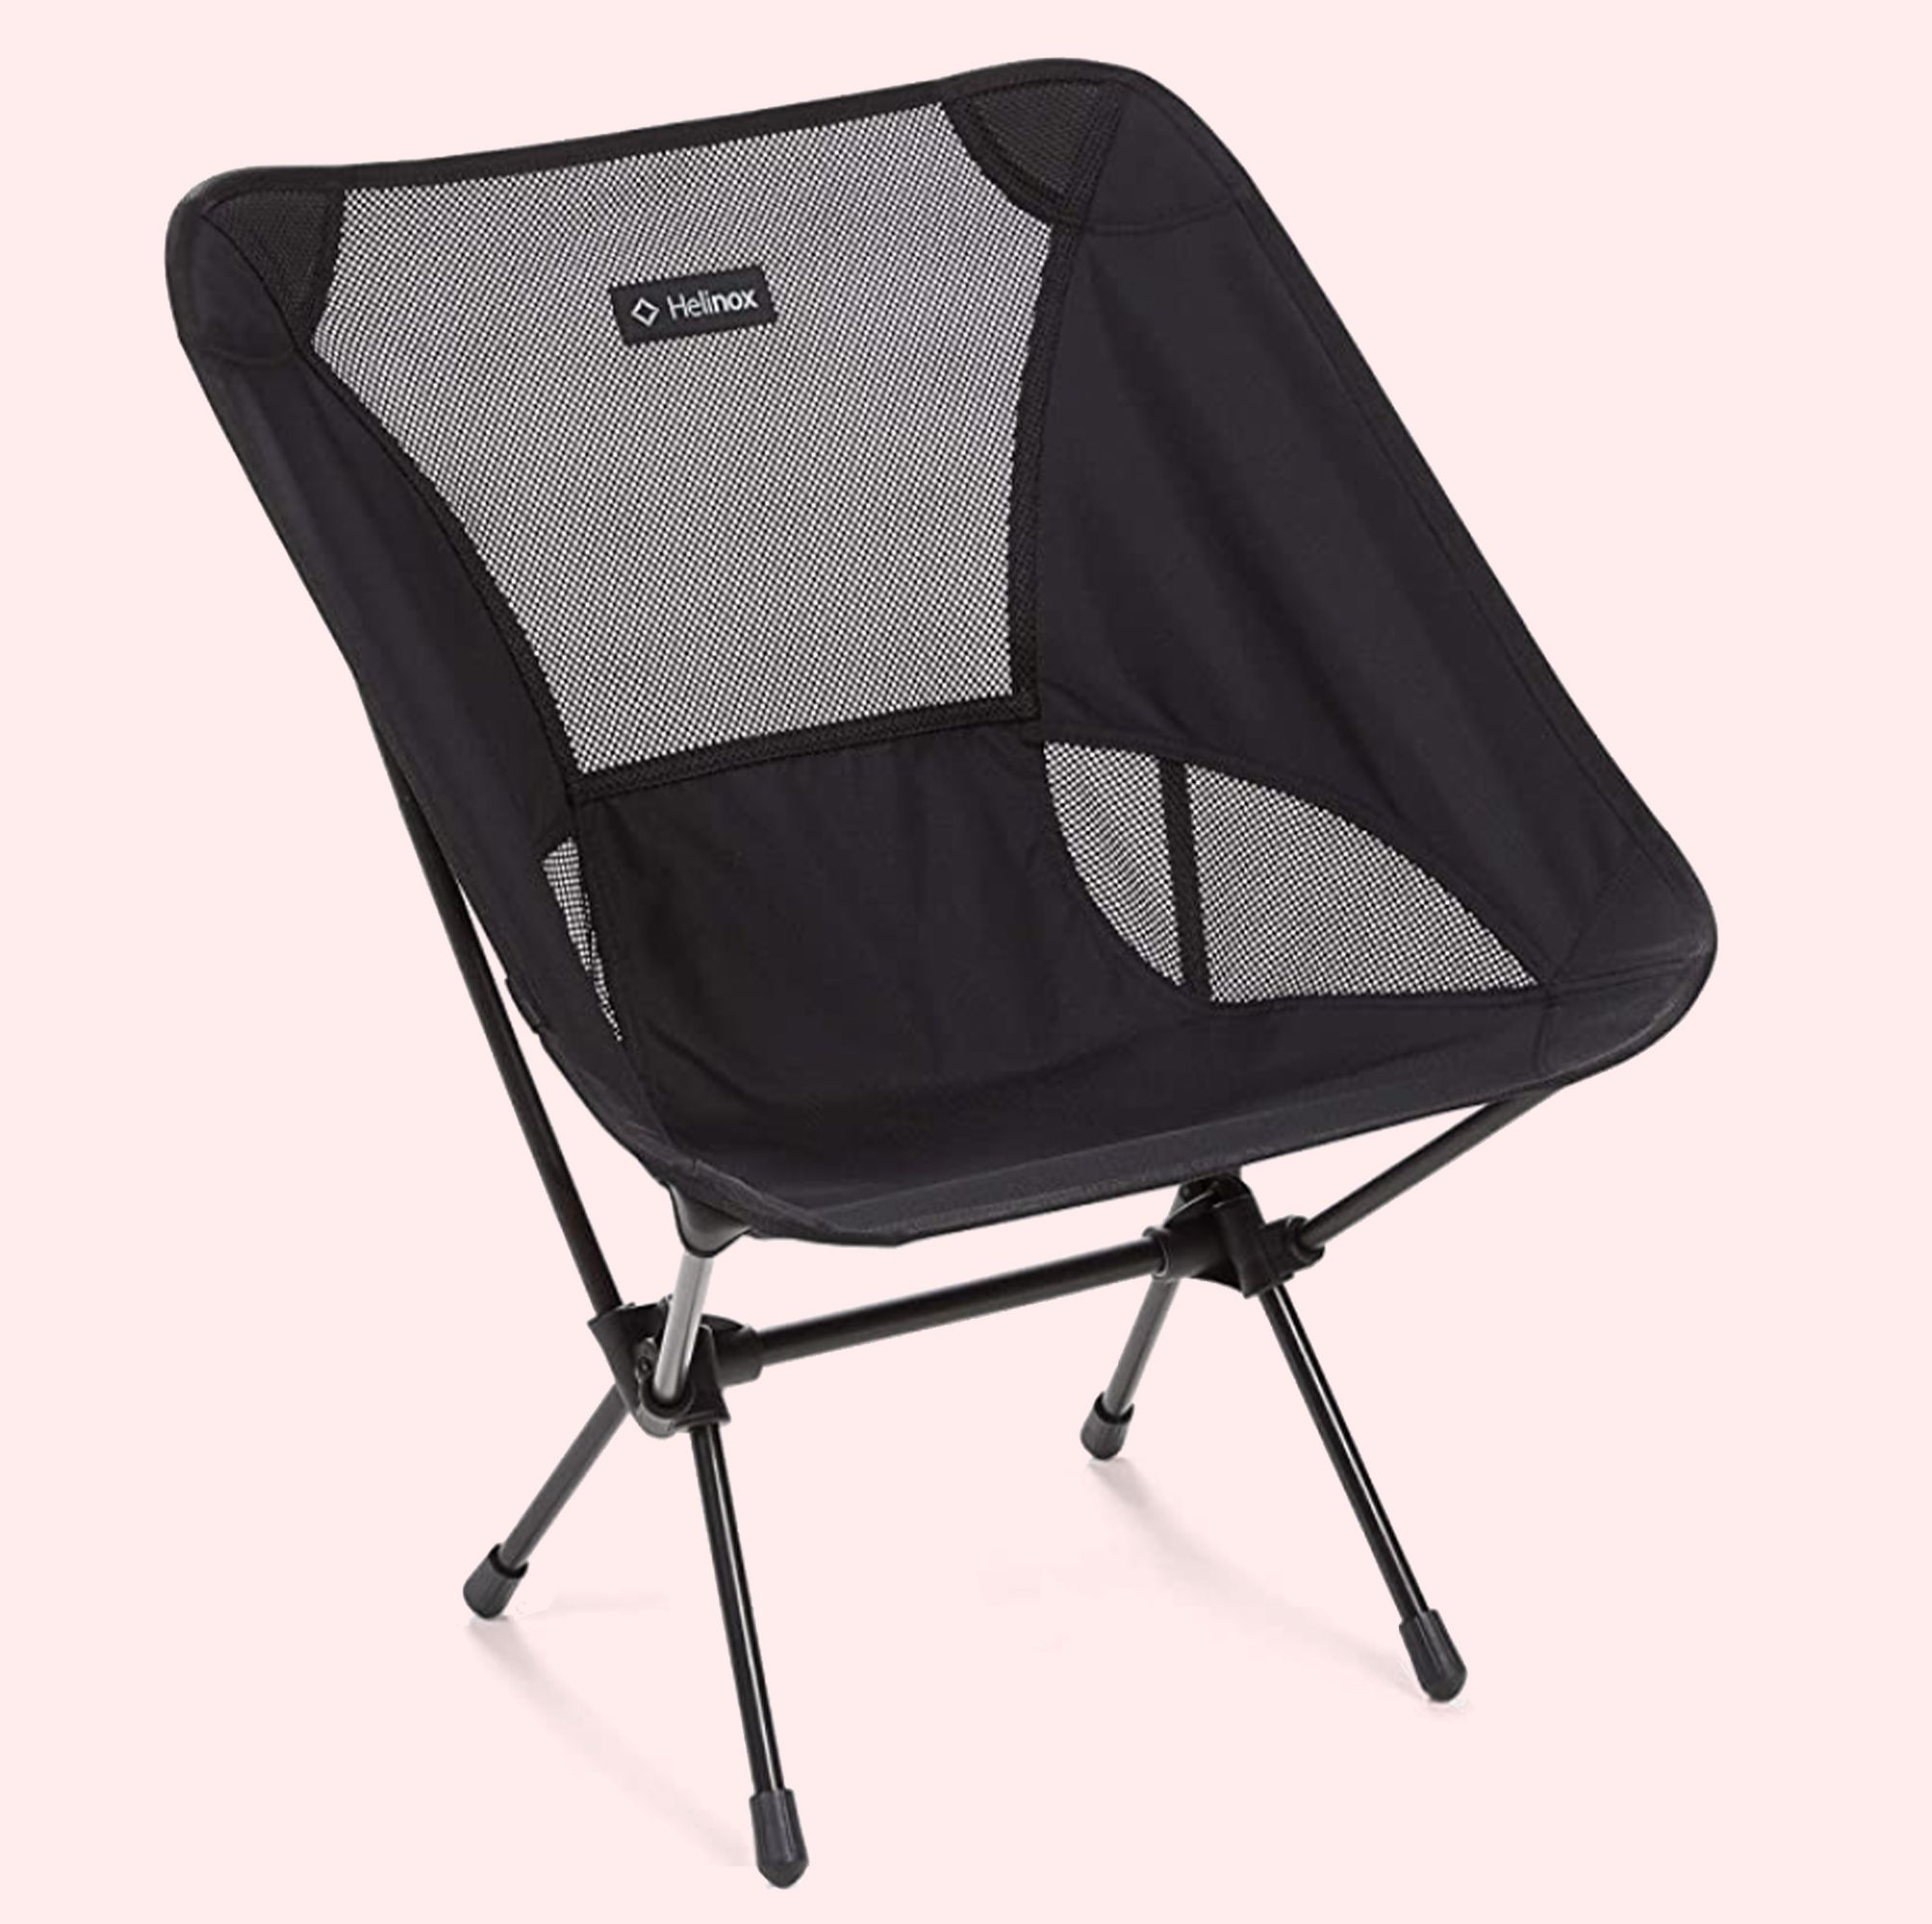 The 13 Best Camping Chairs for Basking in Nature